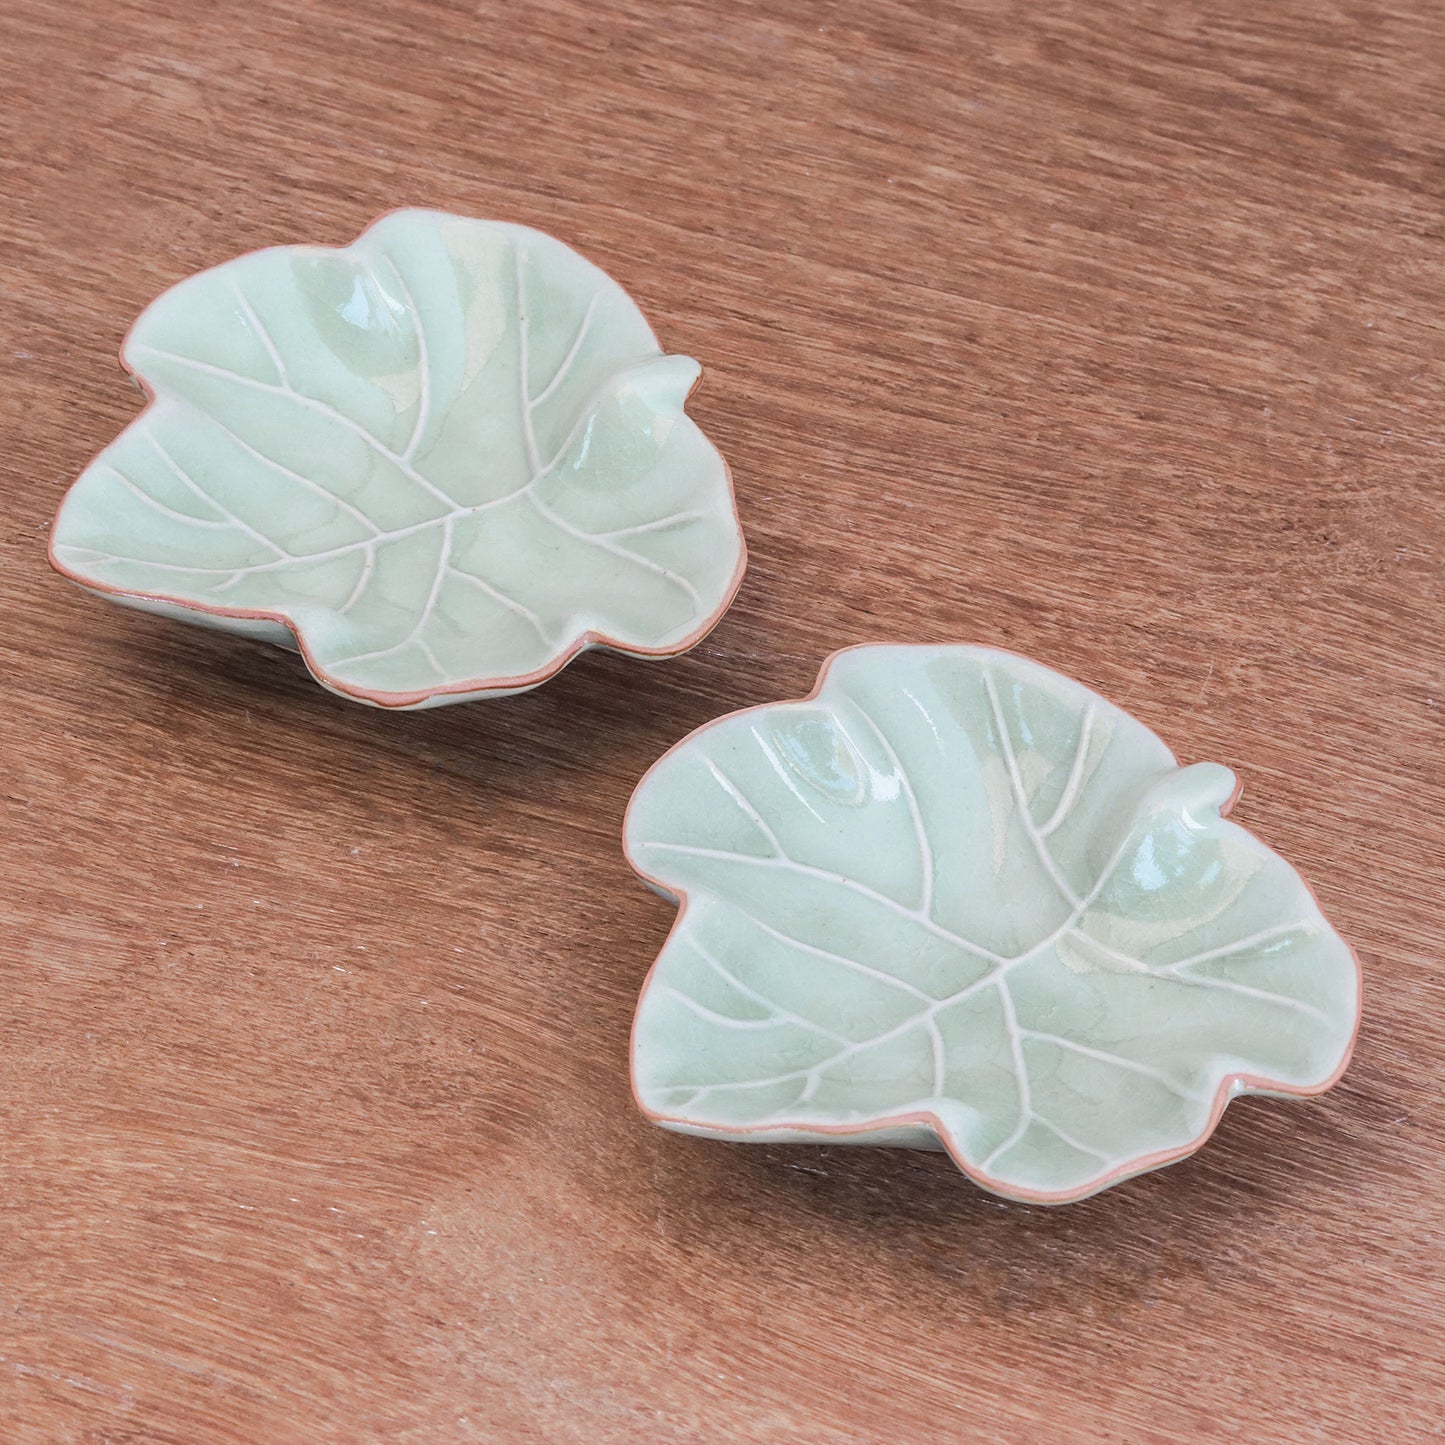 Ivy Gourd Leafy Celadon Ceramic Appetizer Bowls from Thailand (Pair)